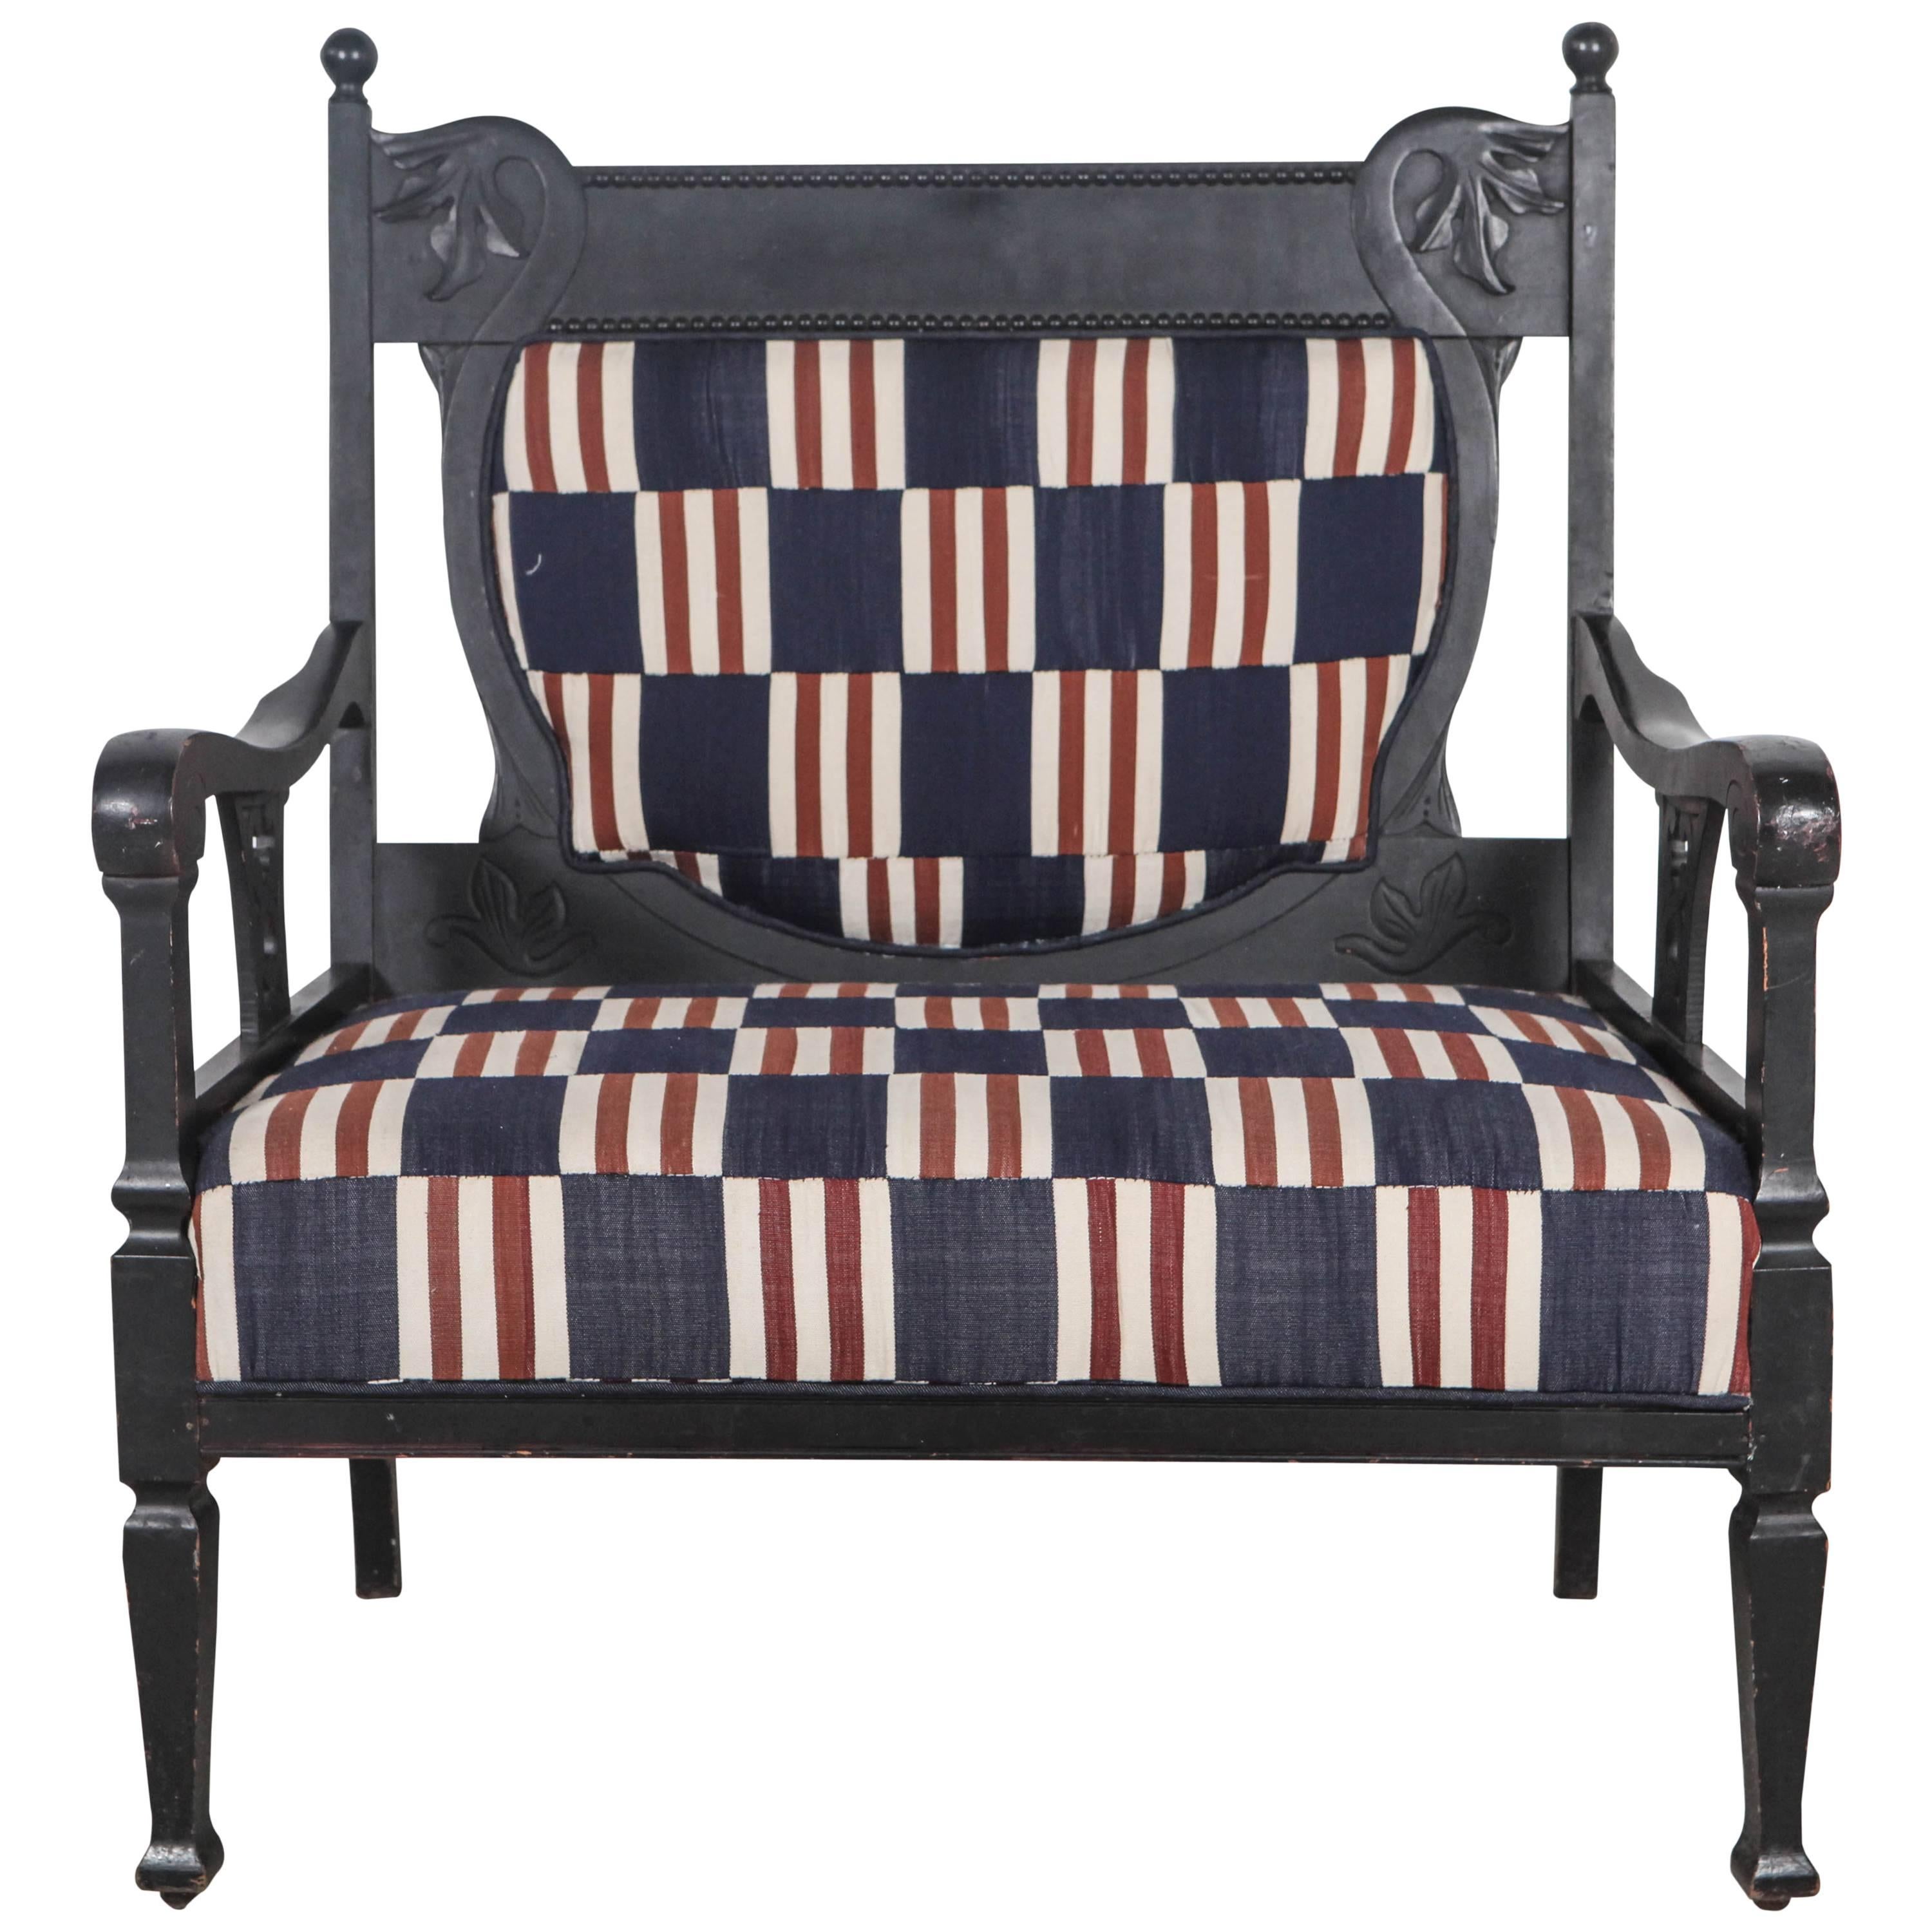 Edwardian Salon Small Settee Upholstered in Vintage African Fabric